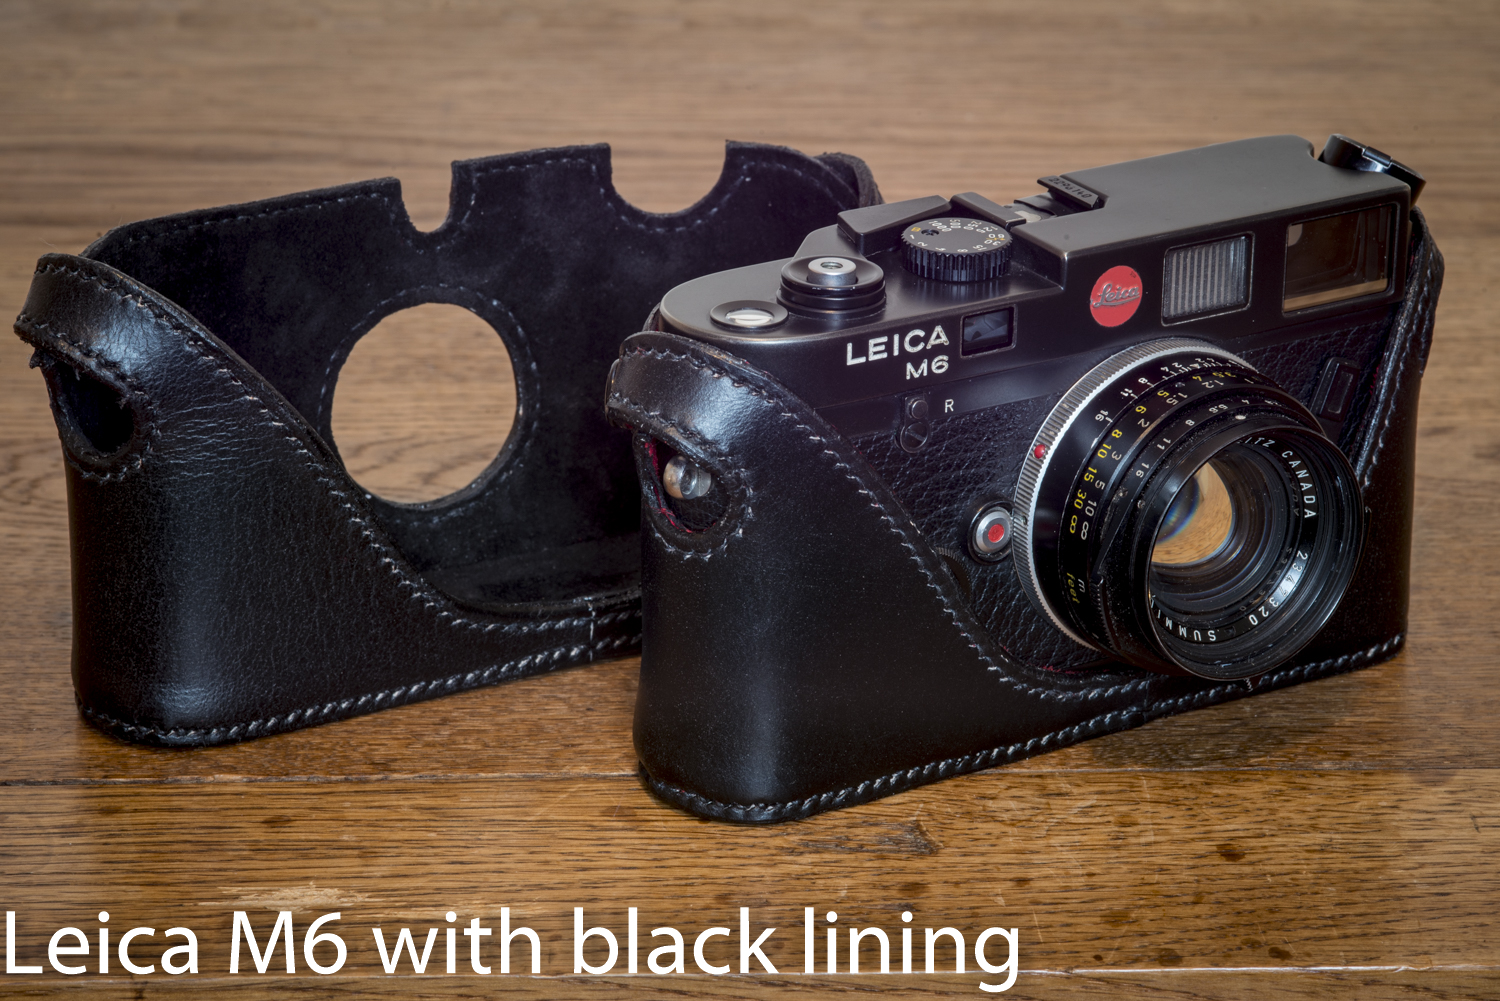 Classic Cases Leica M6 Case with Black Lining